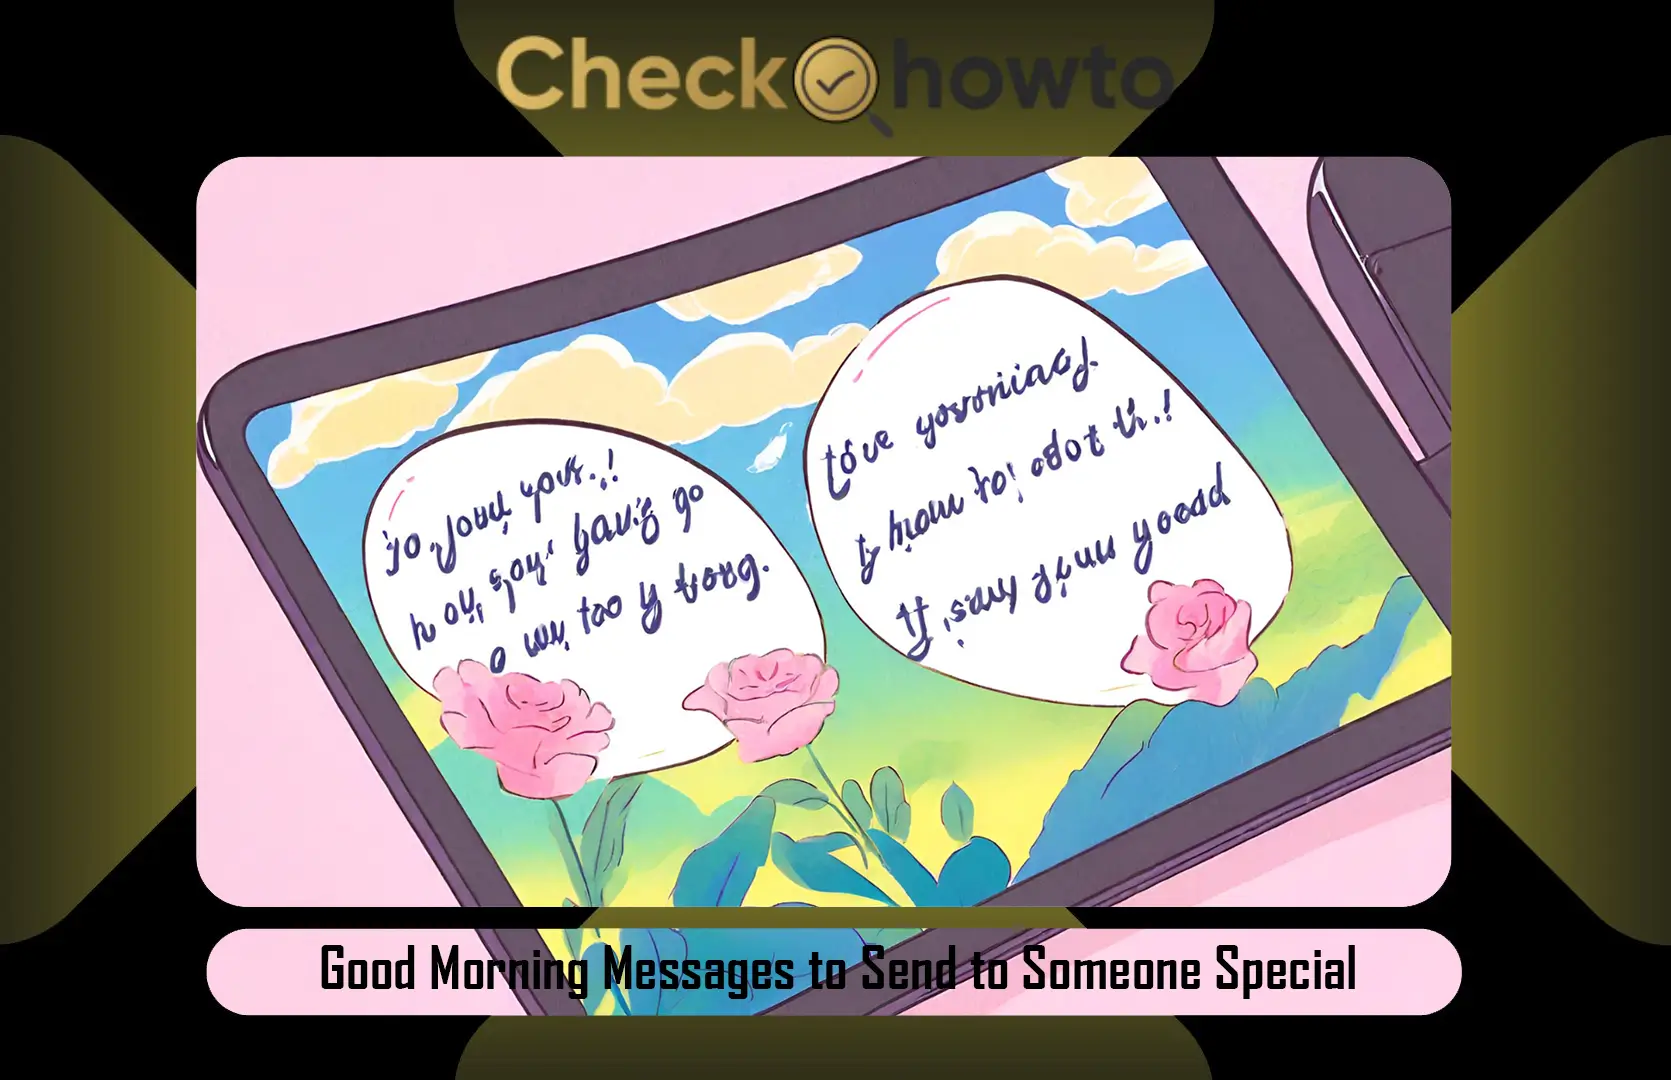 Good Morning Messages to Send to Someone Special